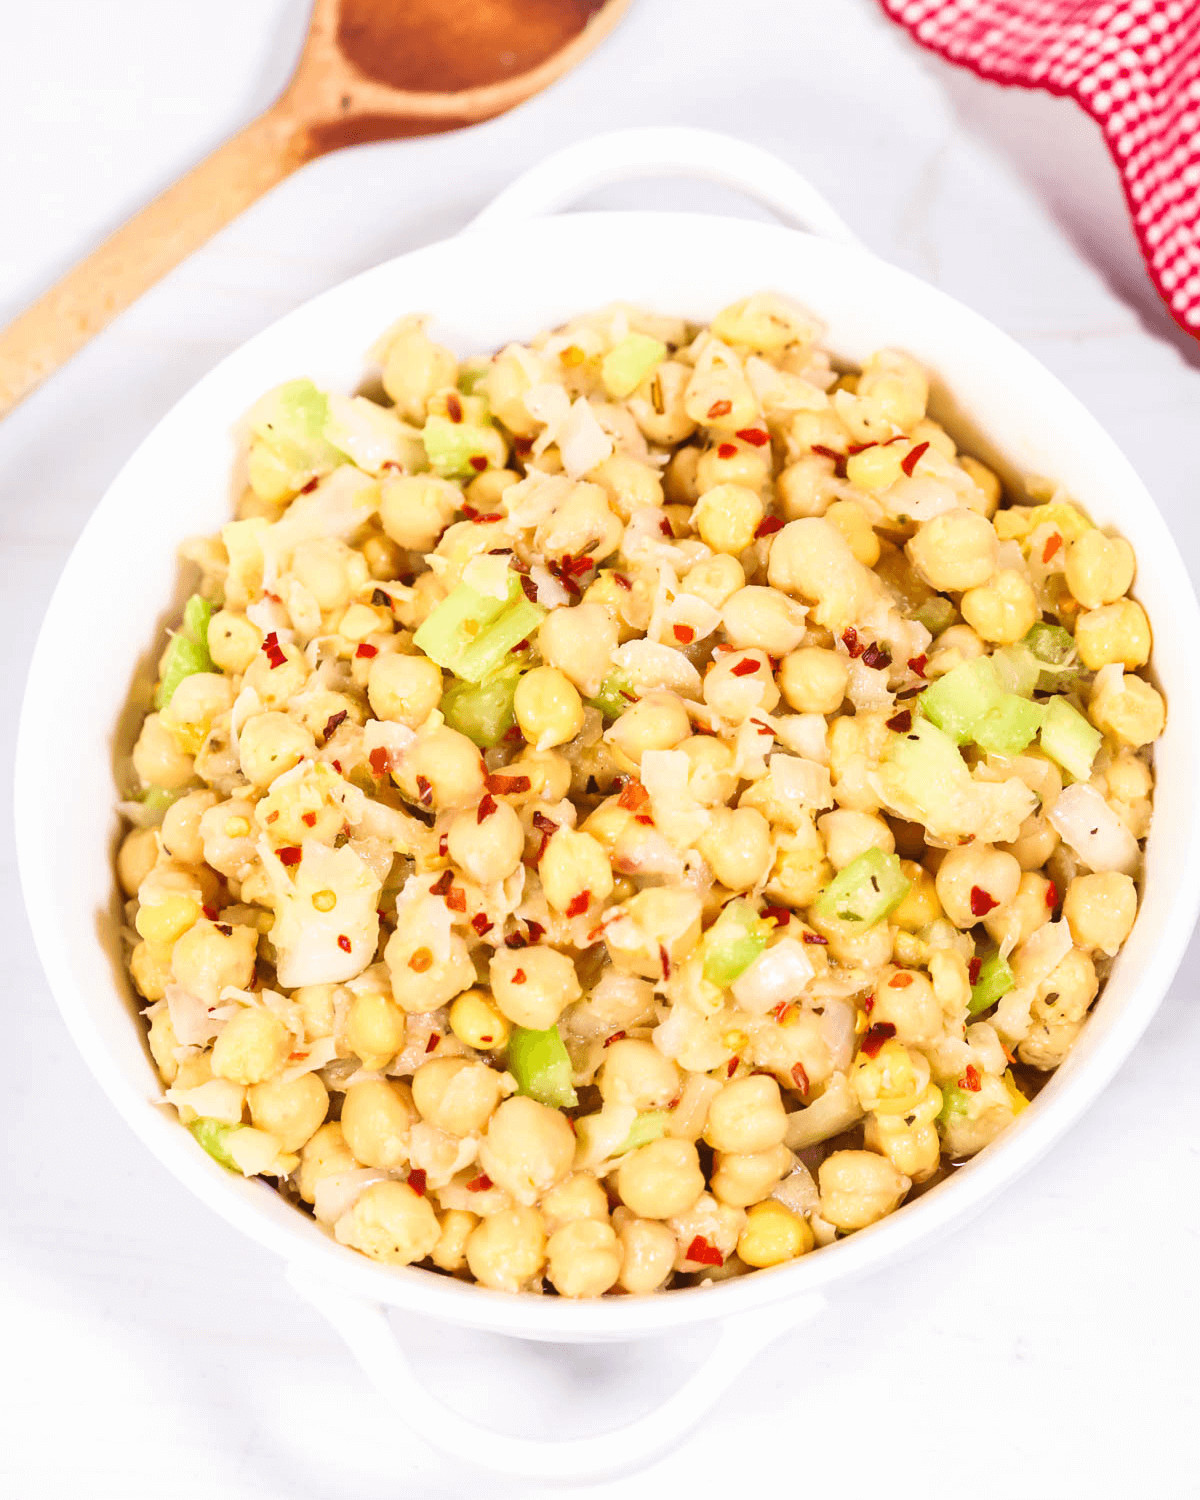 A dish of the  marinated chickpea salad.